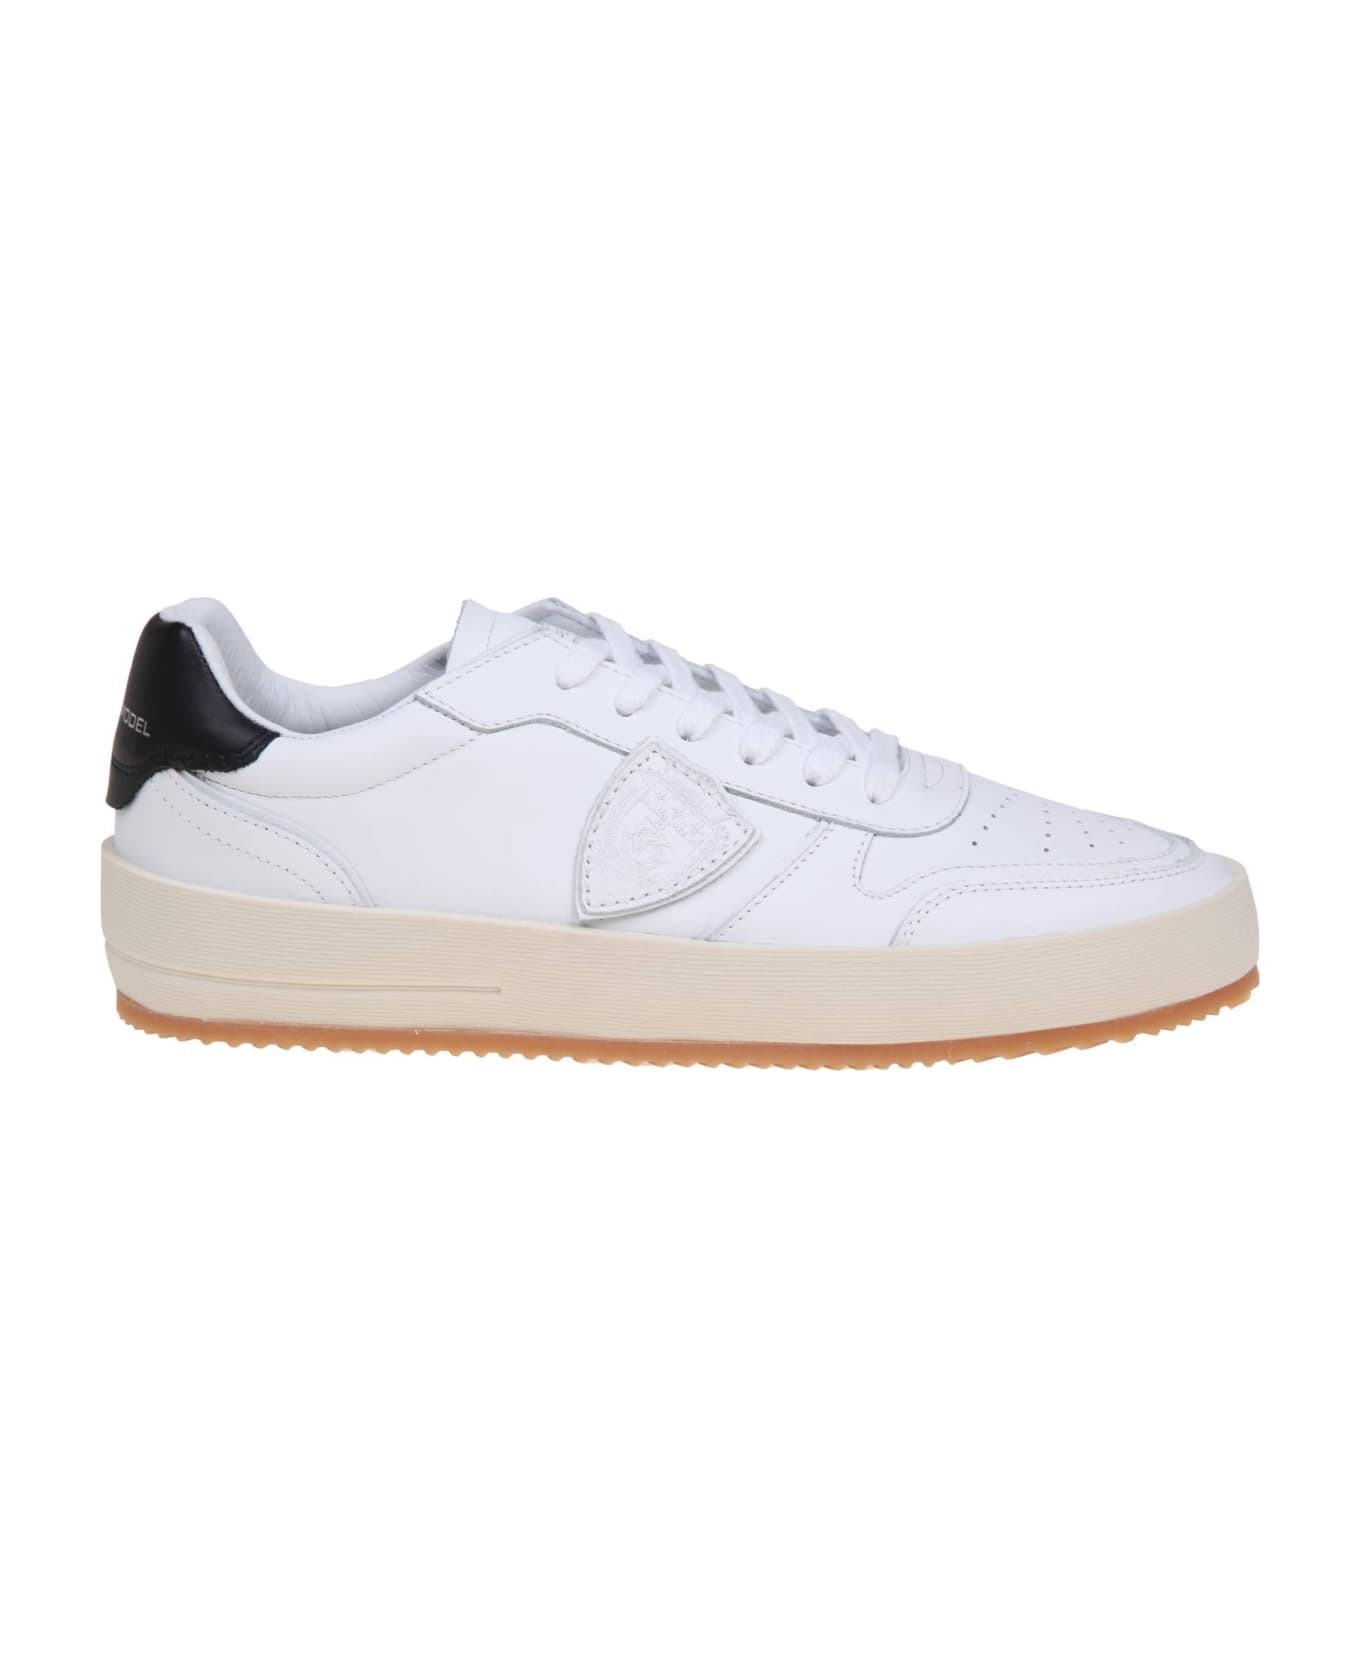 Philippe Model Nice Low White Leather Sneakers - white/black